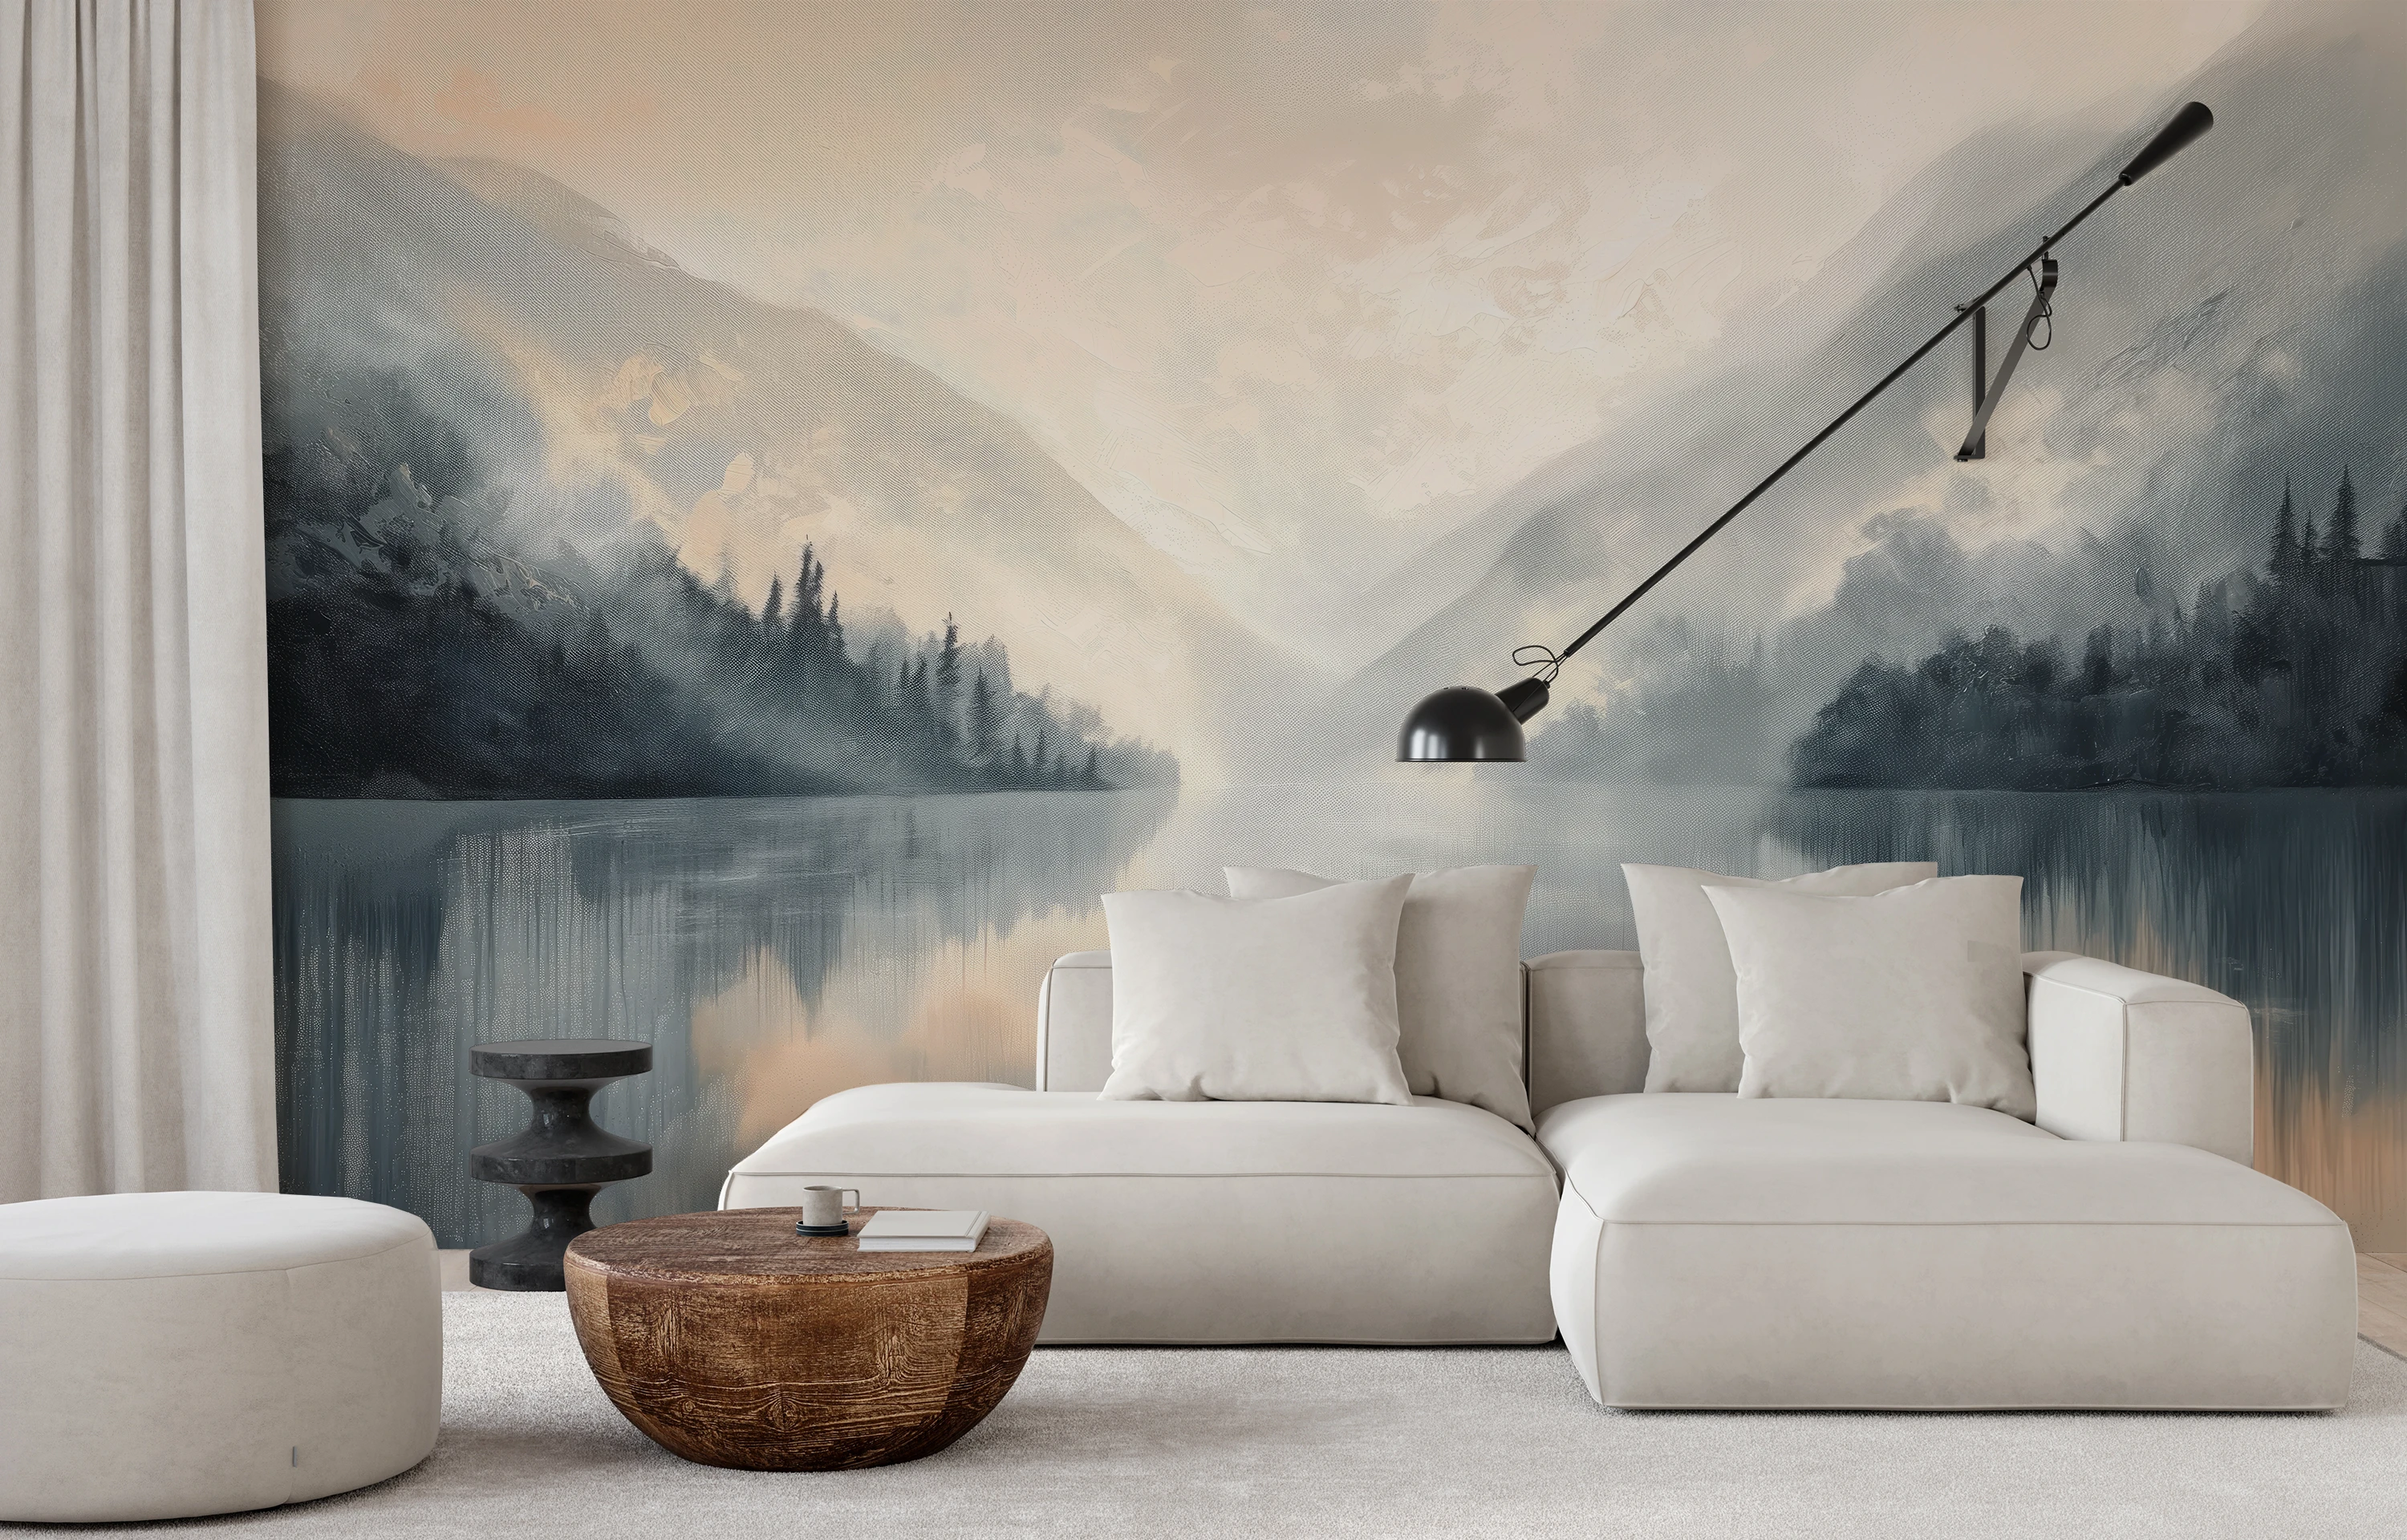 Forest scenery in shades of gray and blue, creating the atmosphere of a quiet morning in the mountains, great for a bedroom or place of rest.